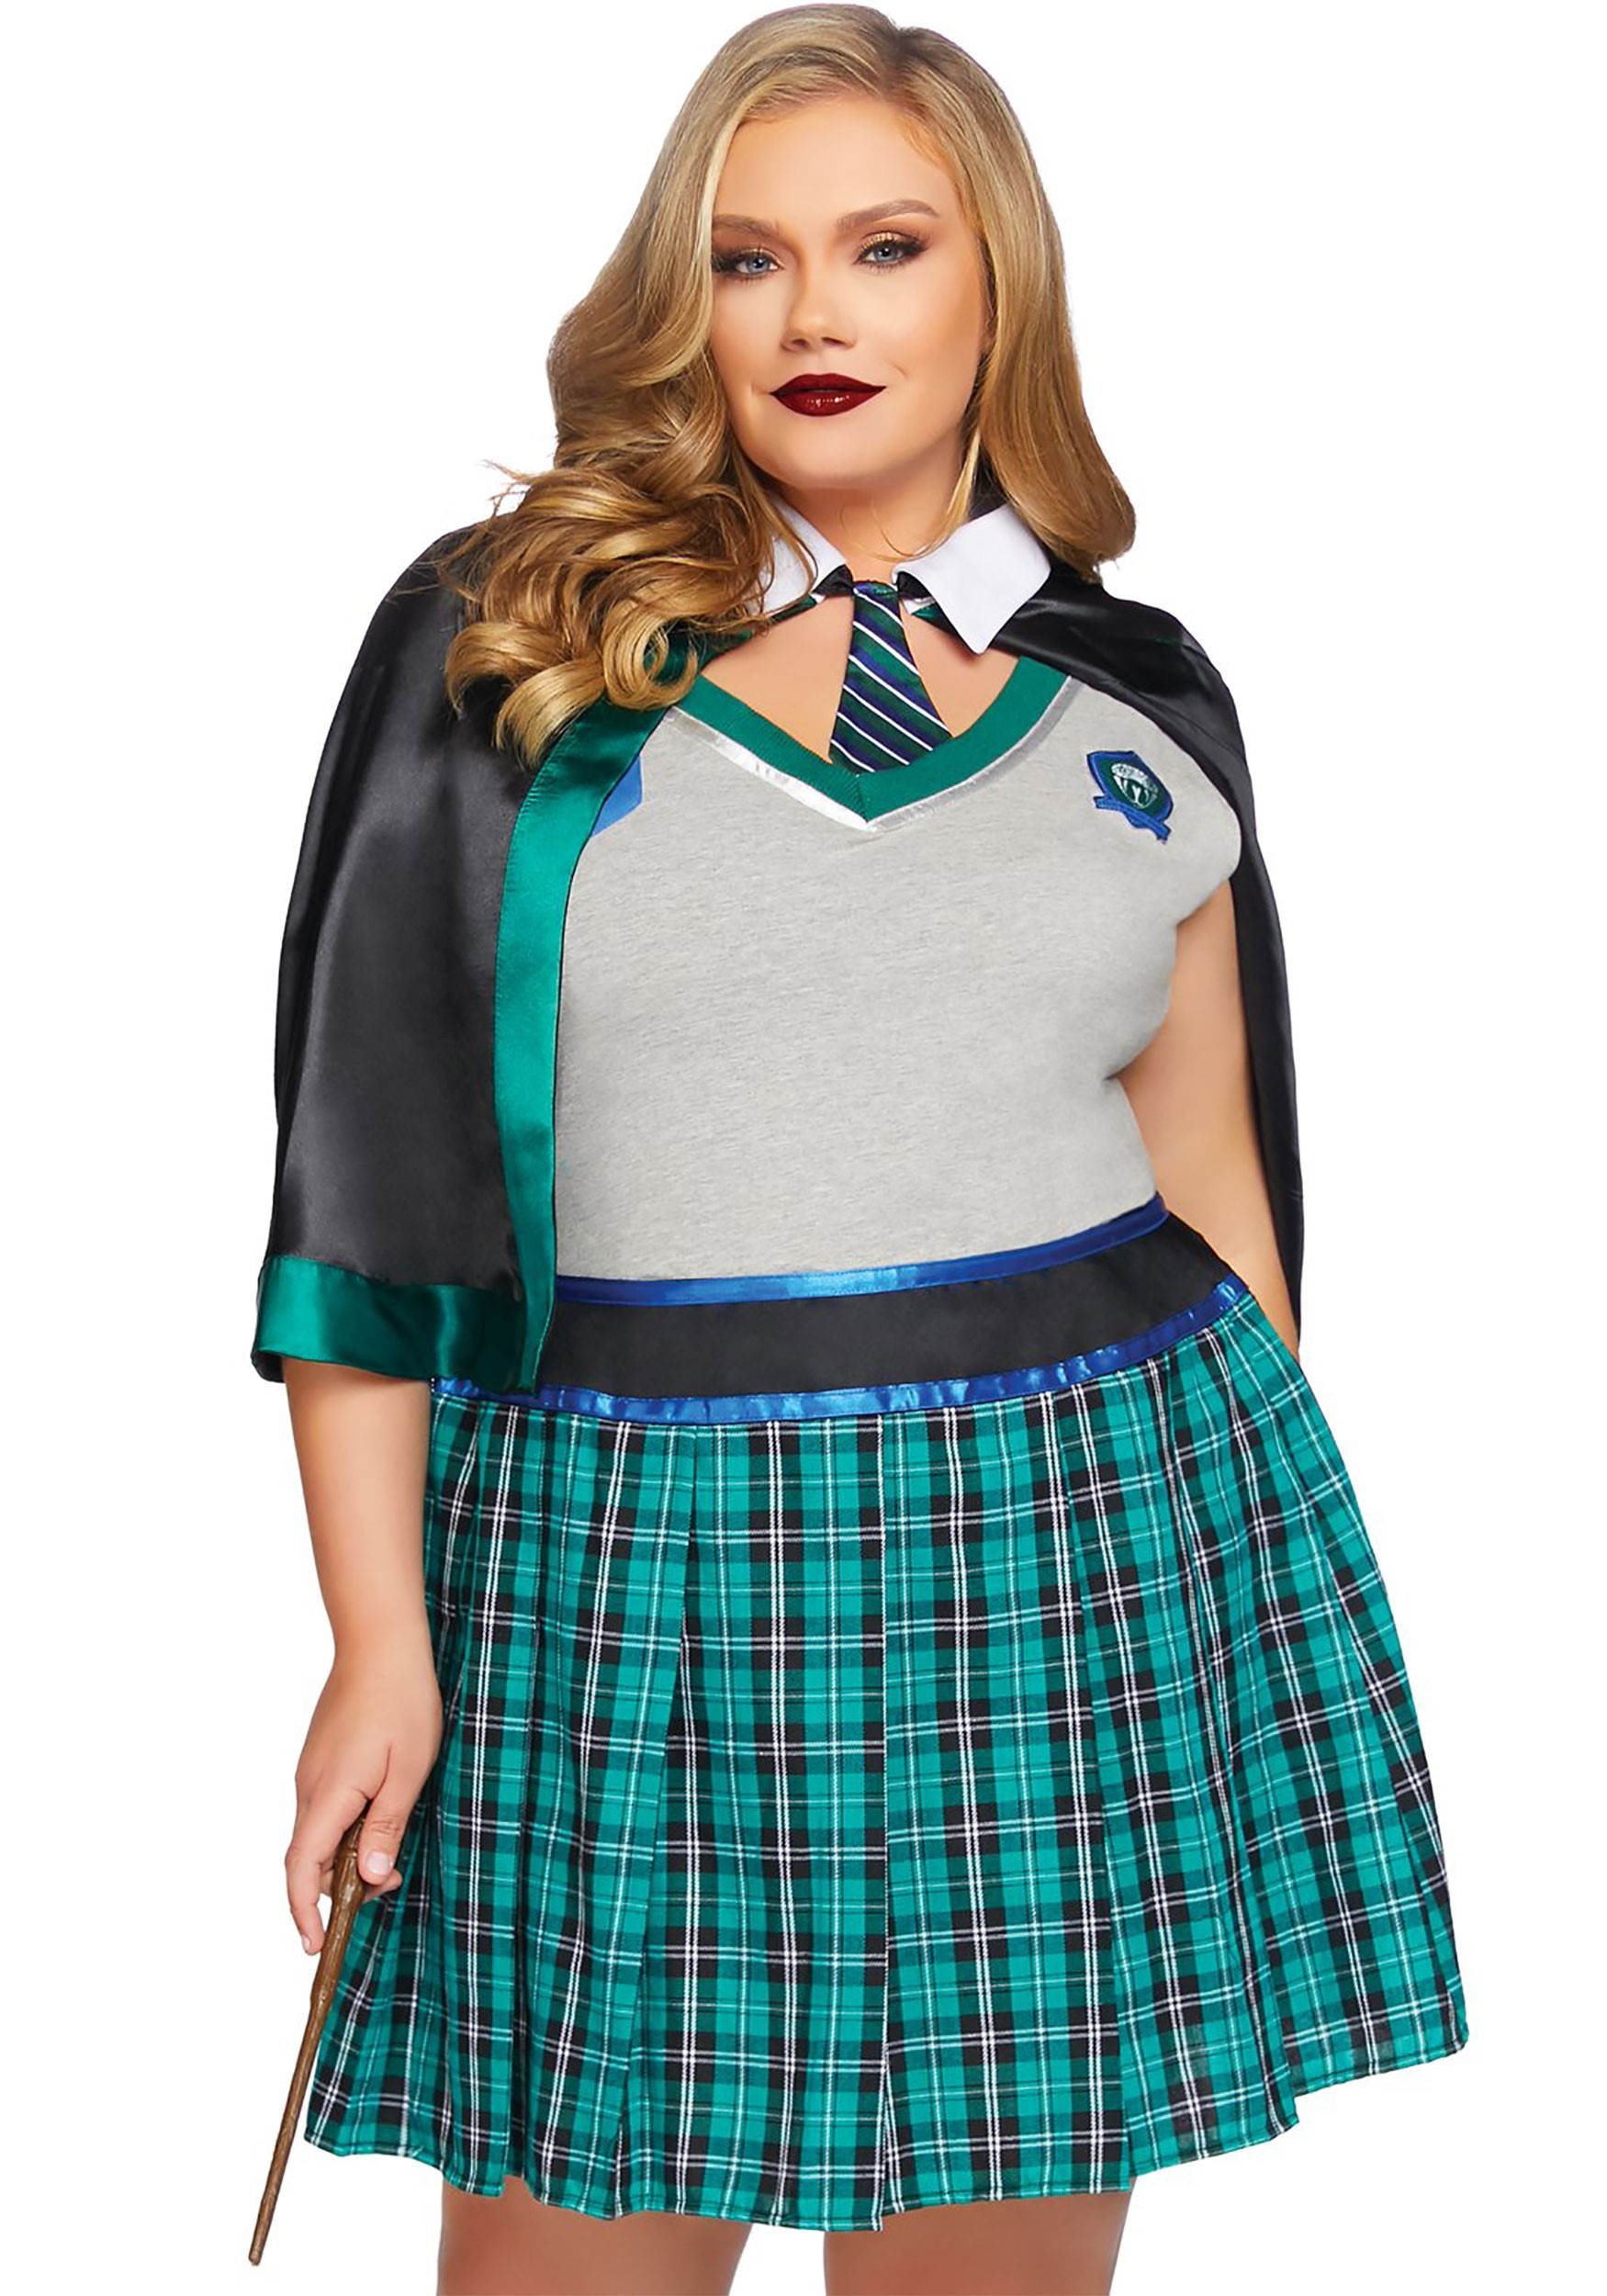 Sinister Spellcaster Adult's Plus Size Costume